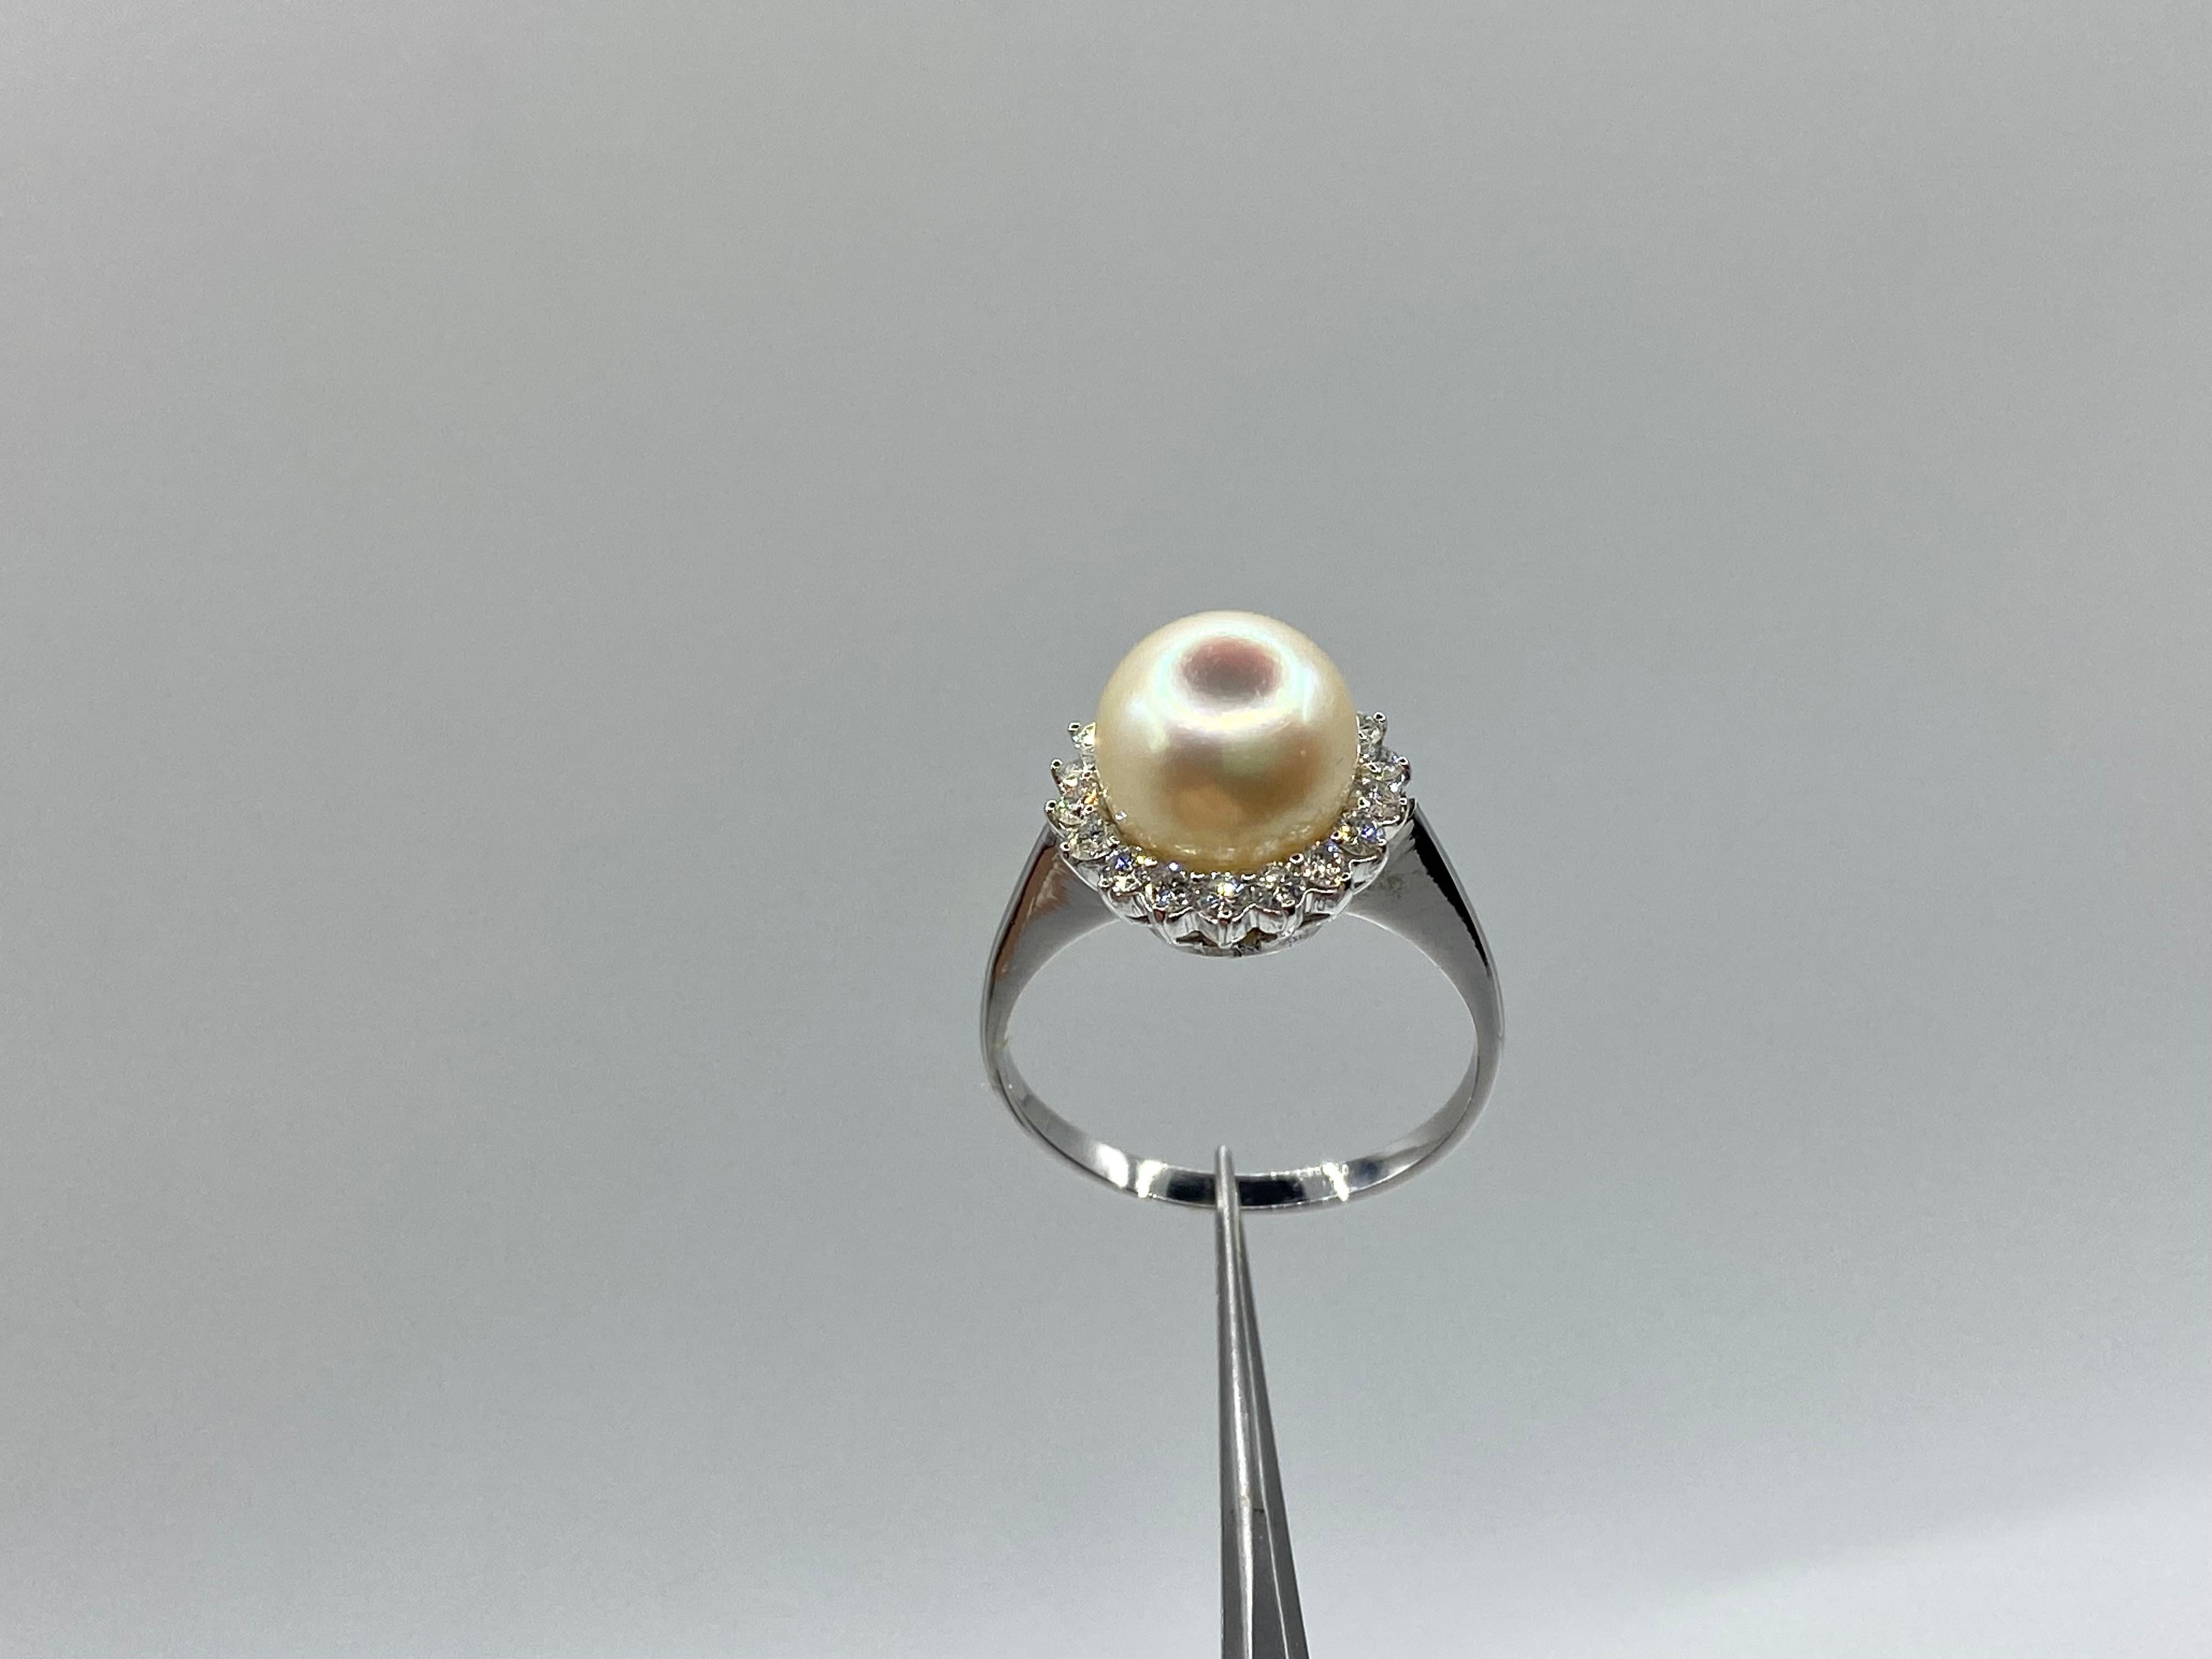 18 kt white gold ring, cultured pearl mm 9, brilliant cut diamonds
Handmade. The cultured pearl, measures 9 mm.  18 kt gold. Brilliant cut diamonds set, color G, vs, 0.50 ct; It weighs 4.5 grams, size 15 (on request I can have it modified by a